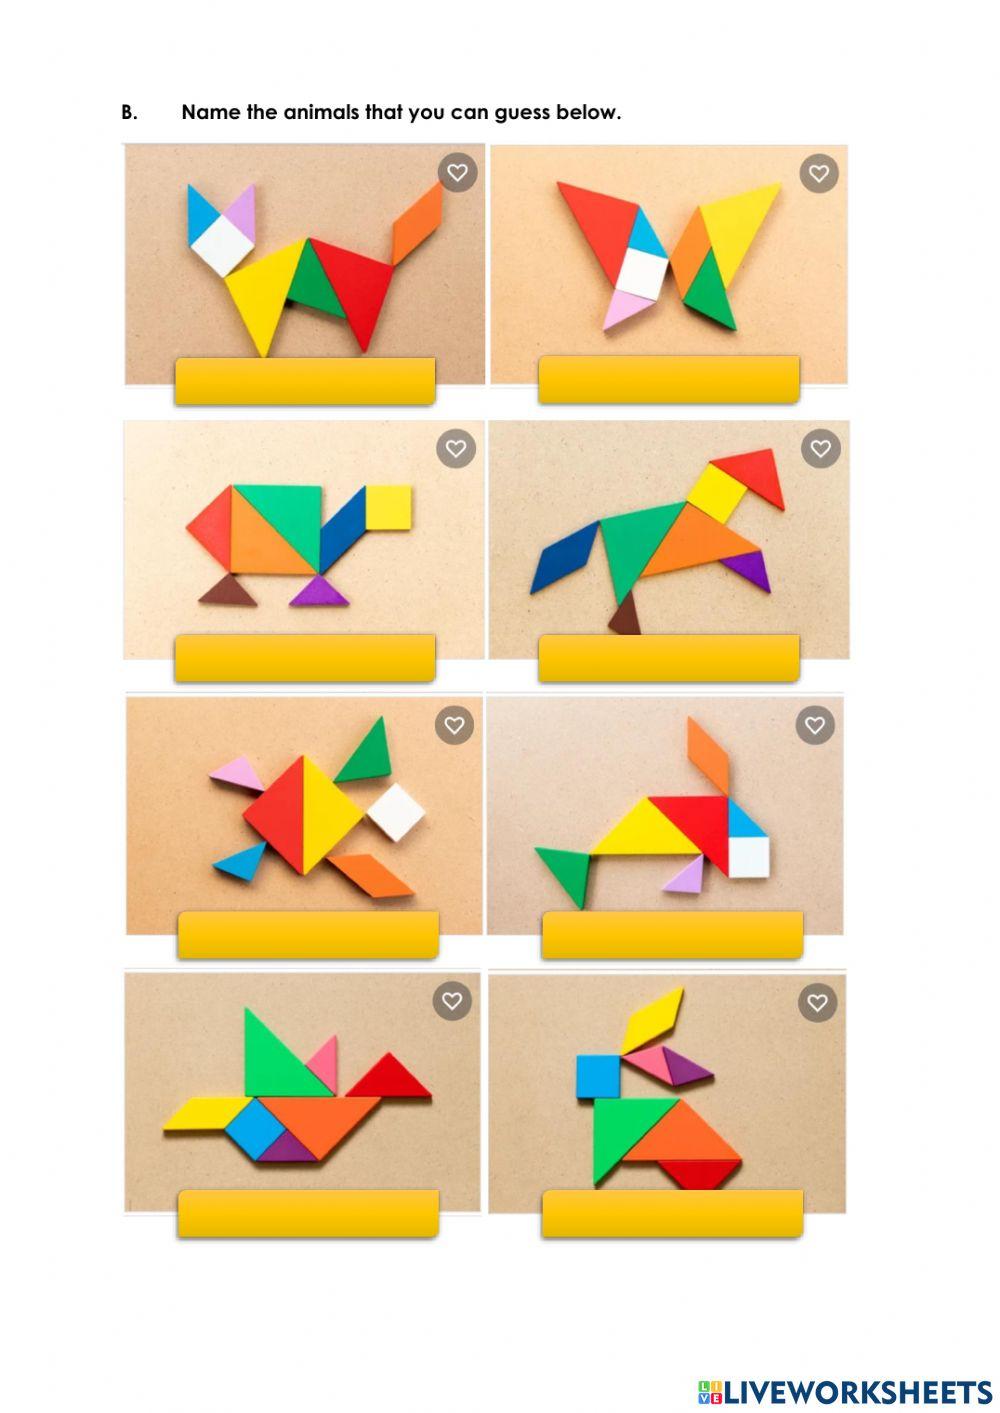 Year 1: Let's play - Tangrams and Shapes